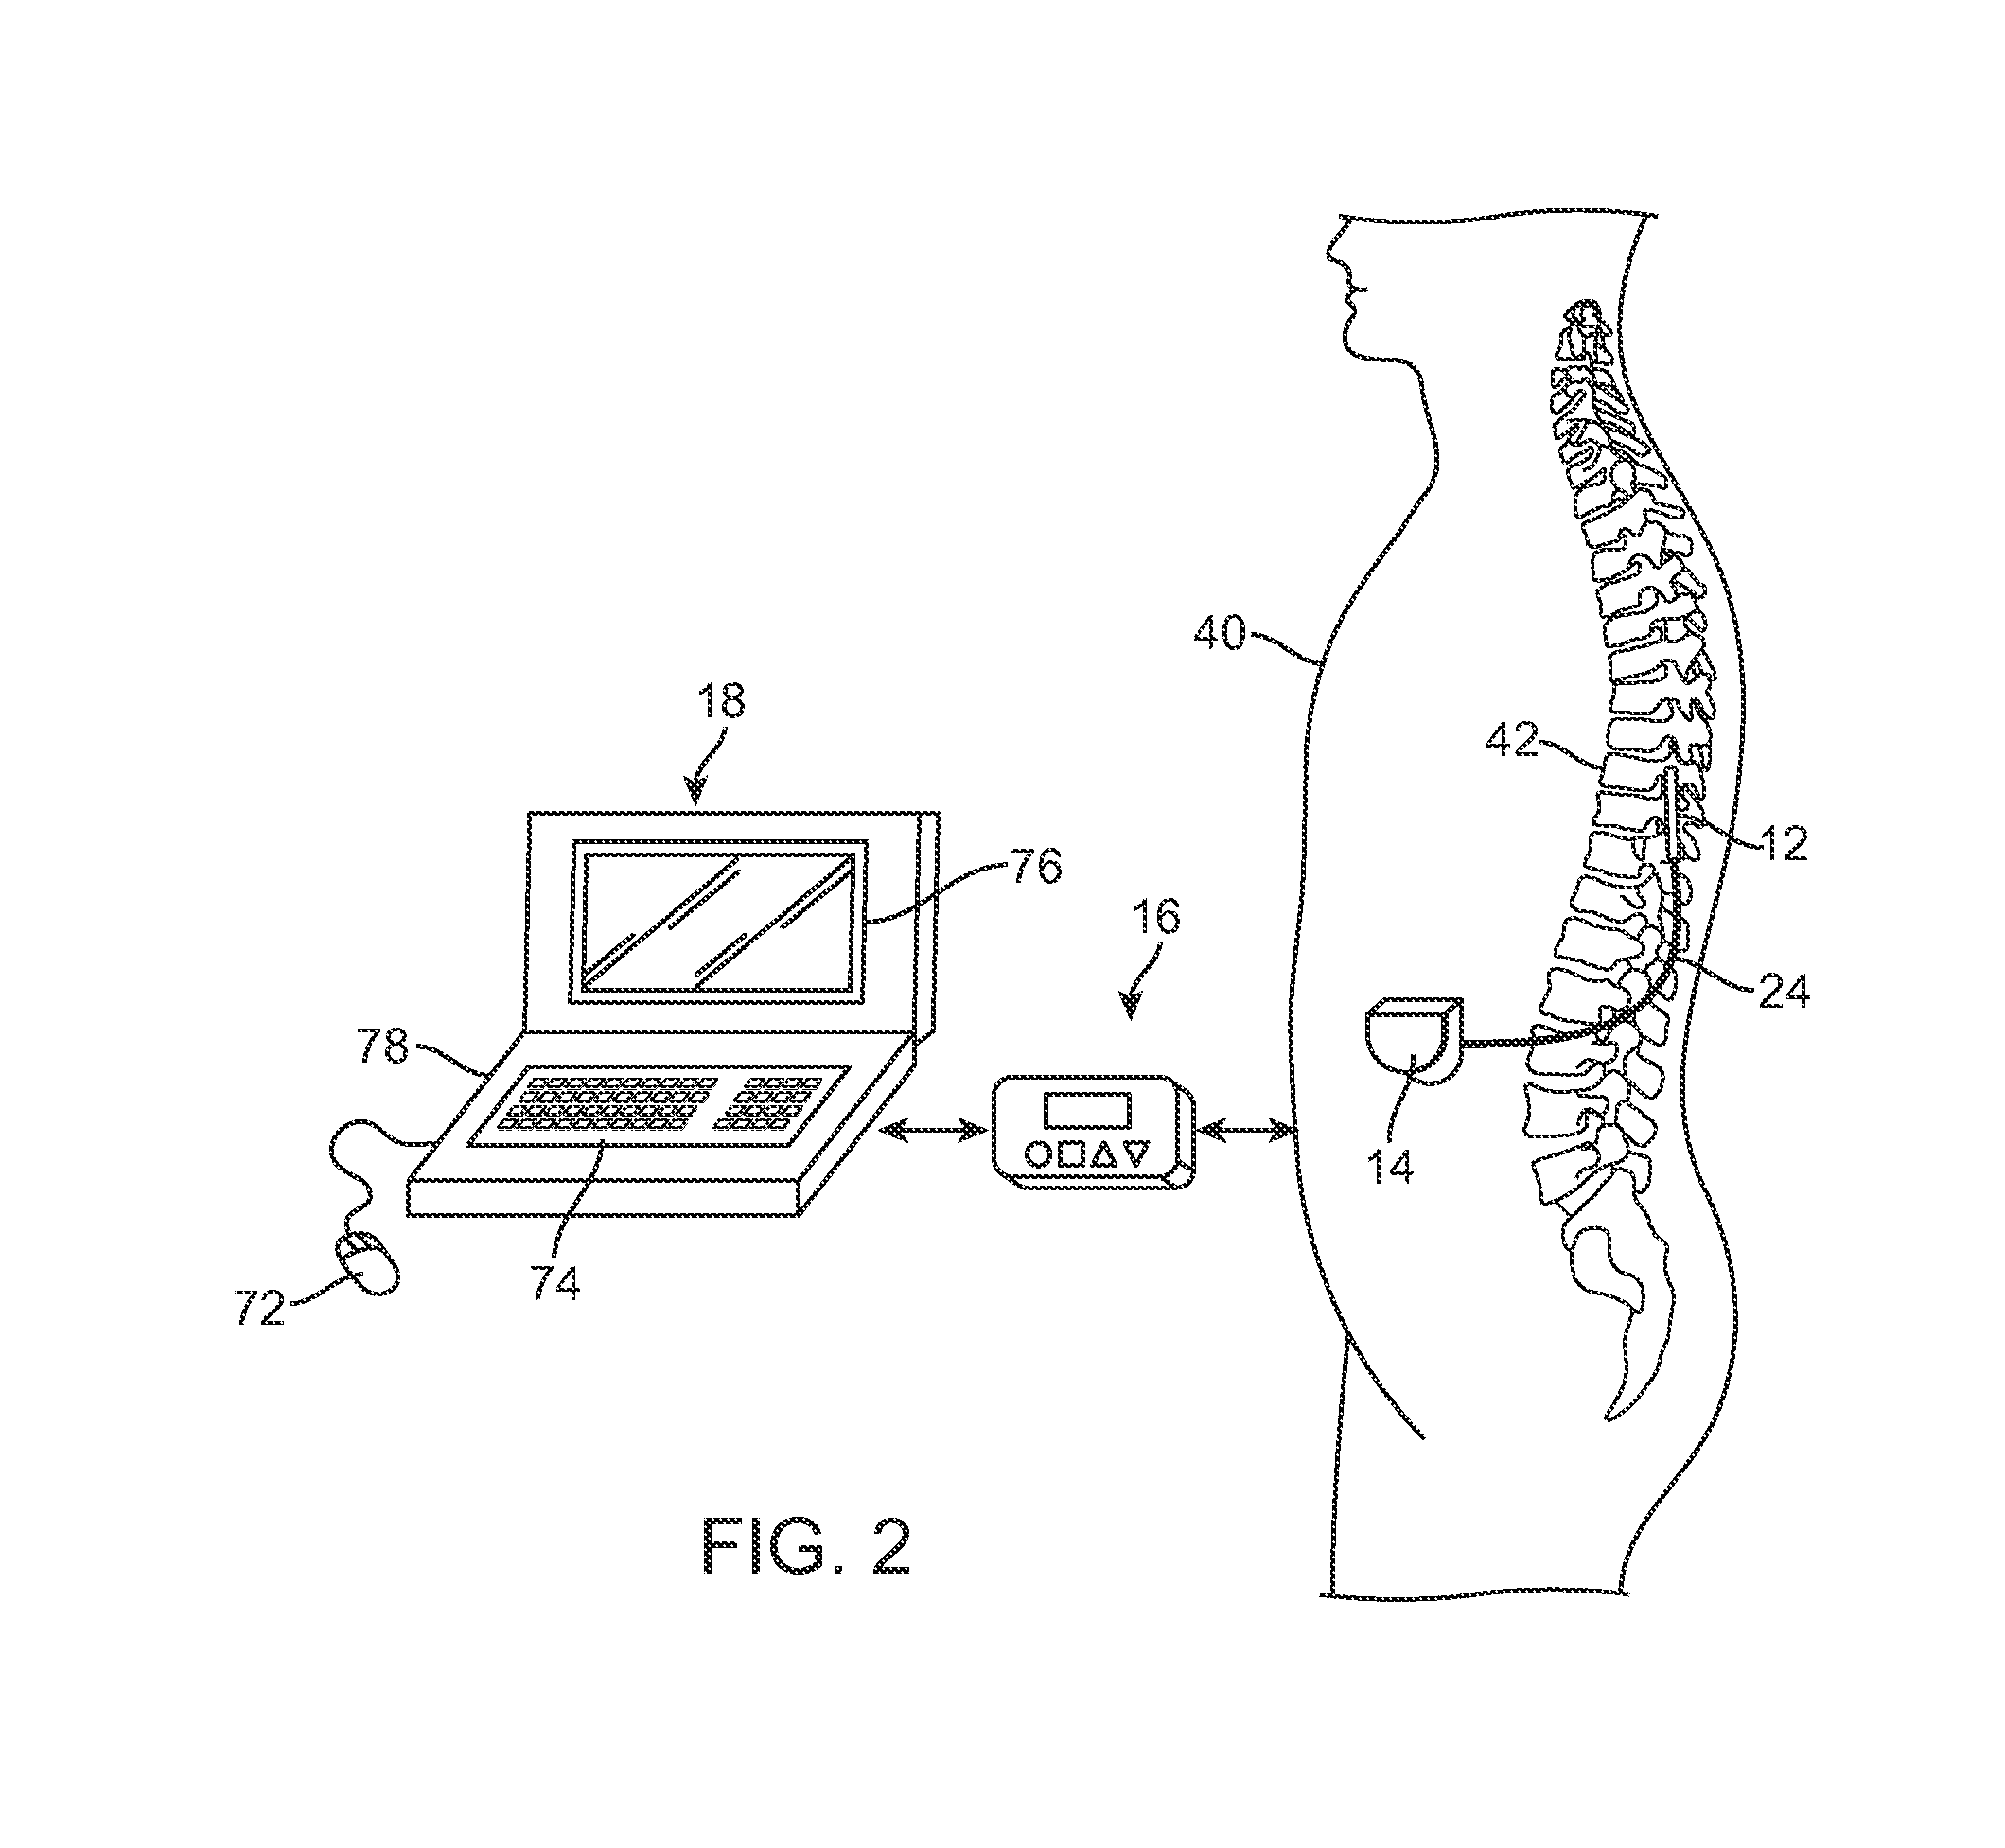 Systems and methods for delivering therapy to the dorsal horn of a patient